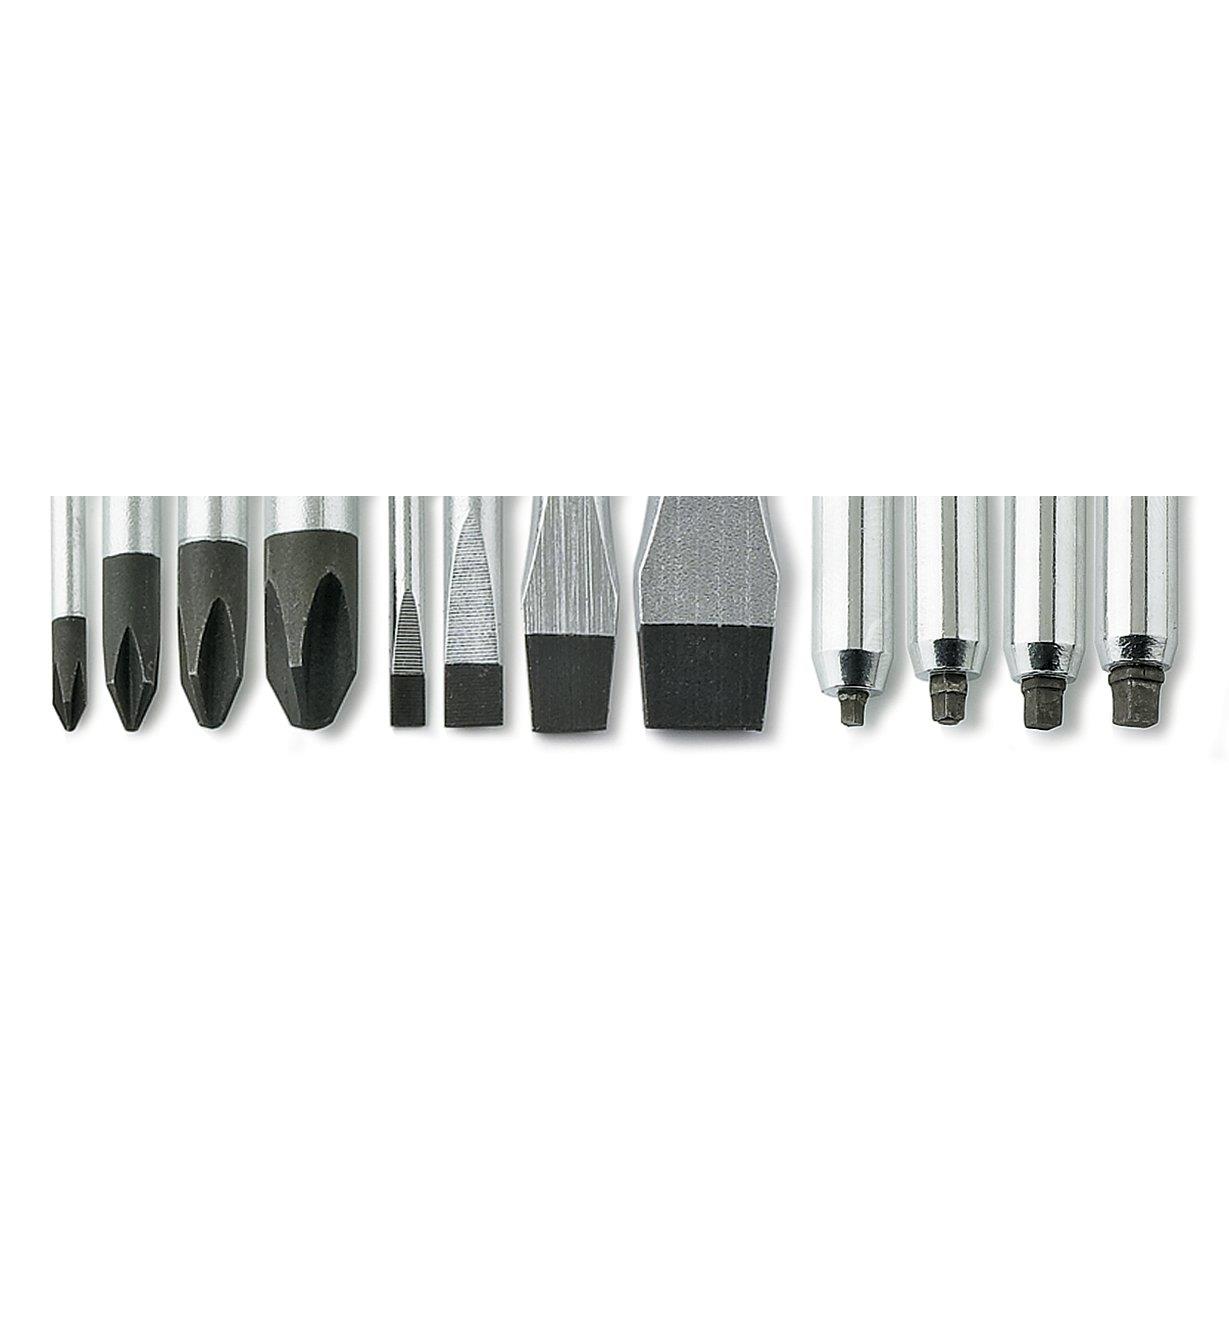 Close-up of full selection of screwdriver tips